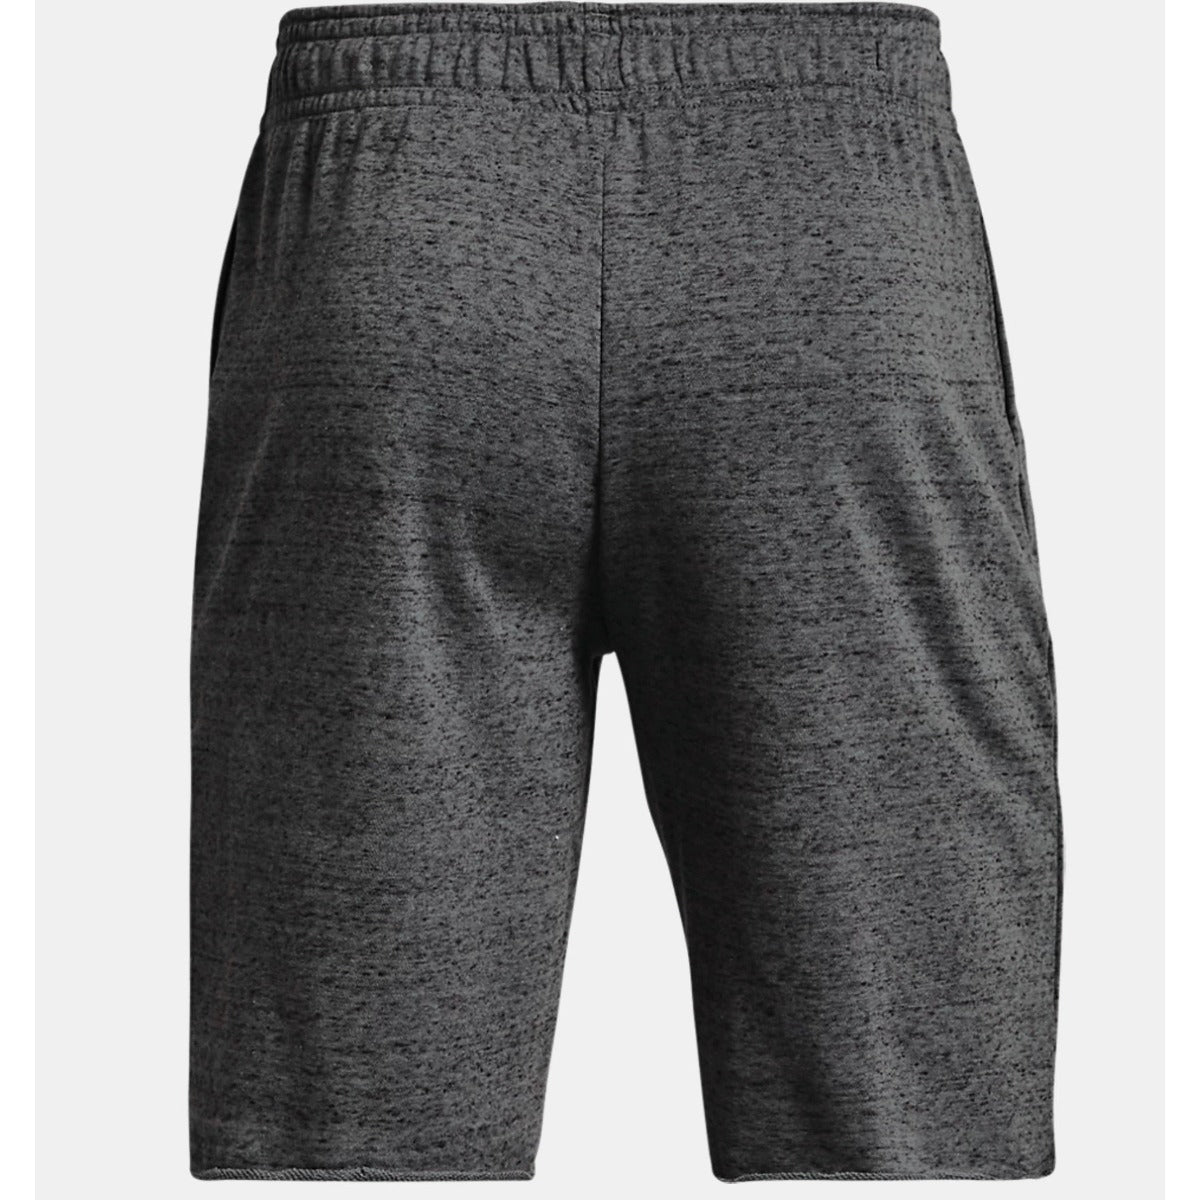 UNDER ARMOUR RIVAL TERRY SHORTS MENS